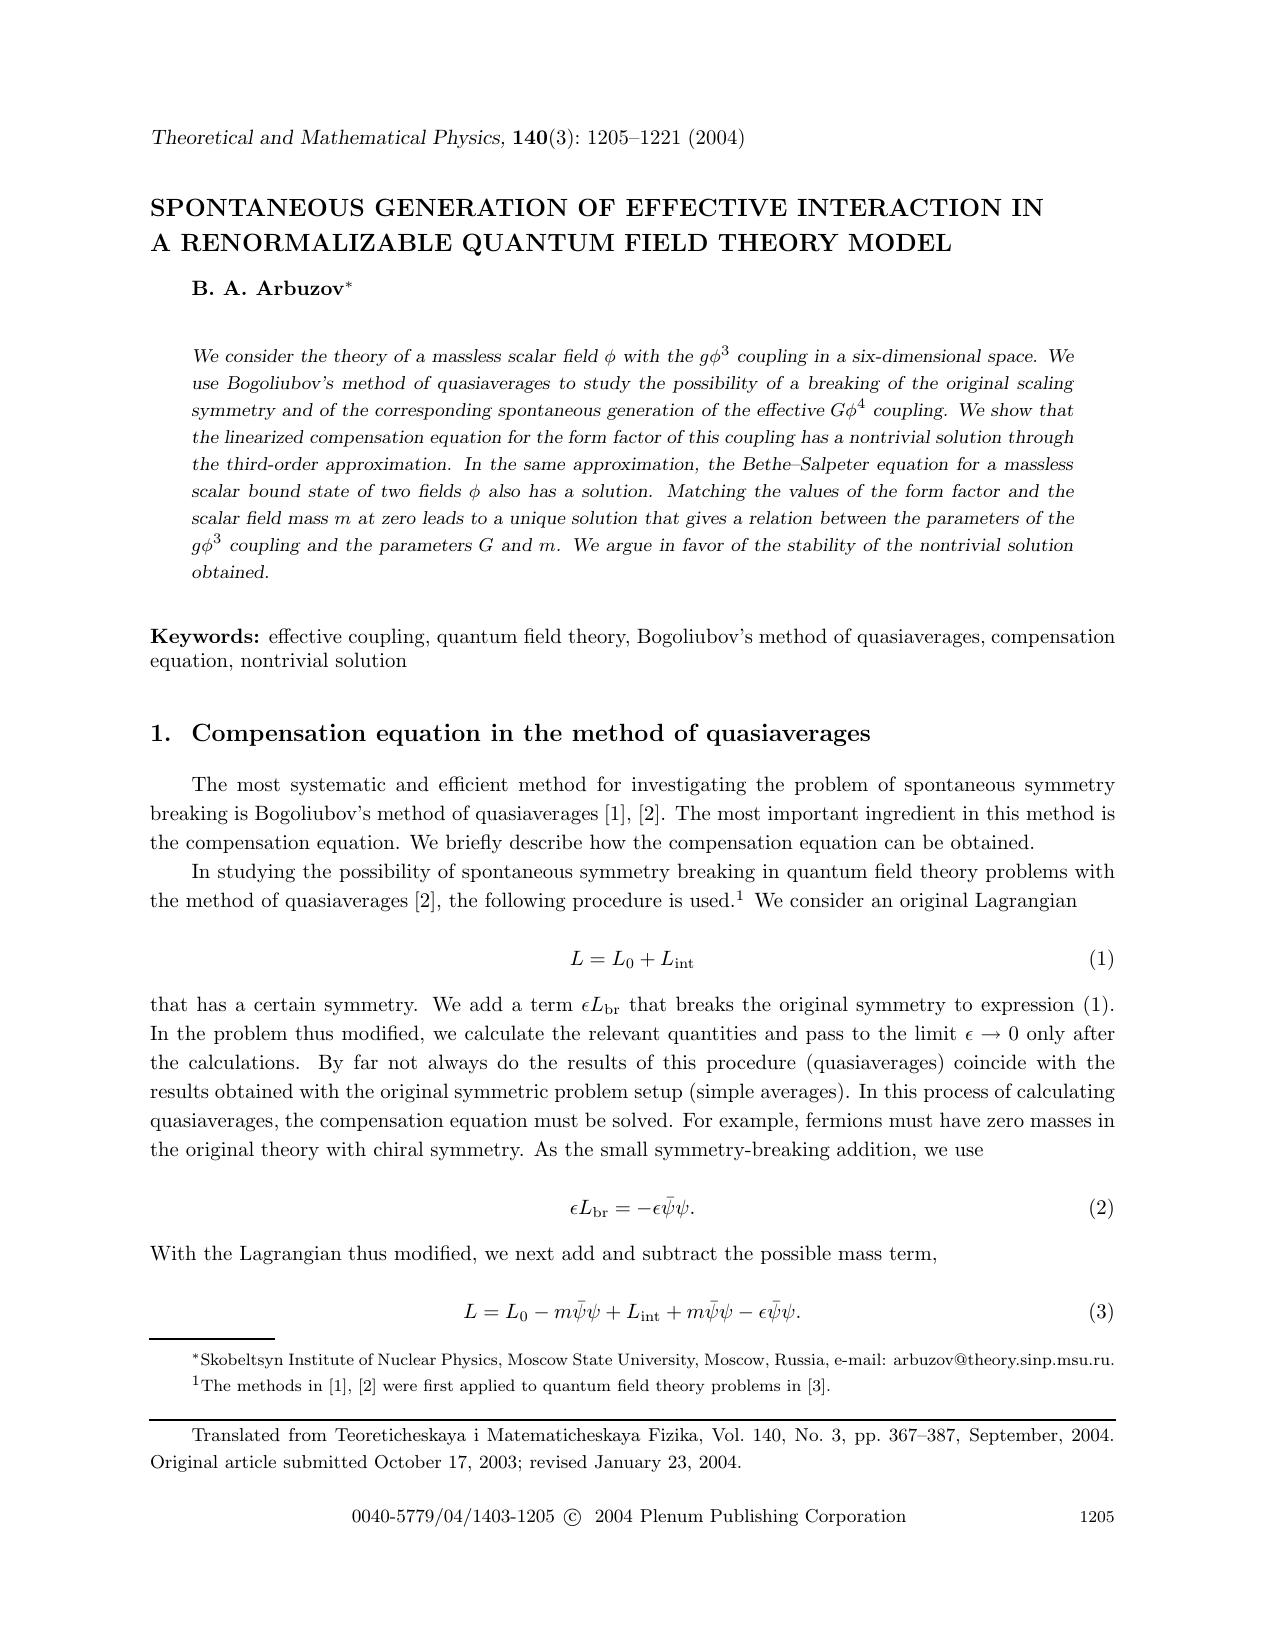 Spontaneous Generation of Effective Interaction in a Renormalizable Quantum Field Theory Model by Unknown